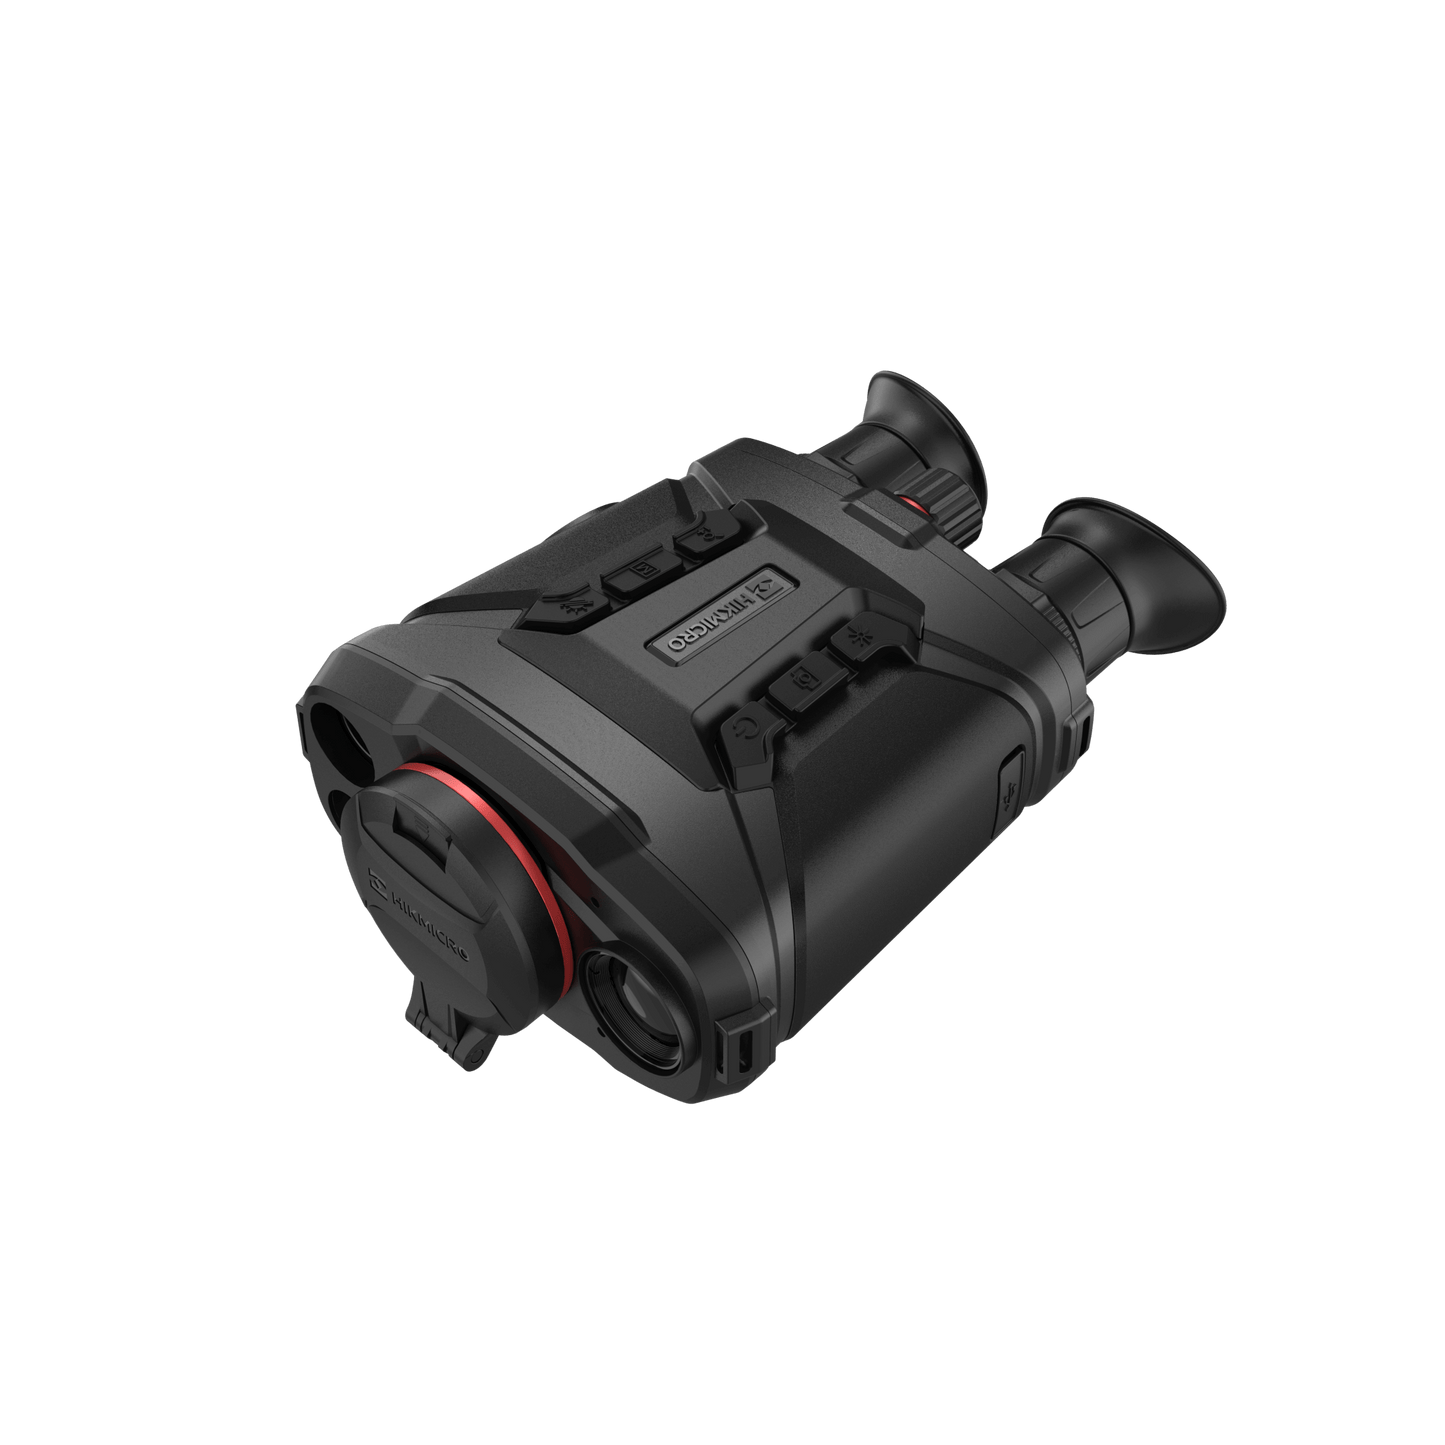 HikMicro Raptor RH50 handheld thermal binocular with infrared and optical capabilities - Front Left View